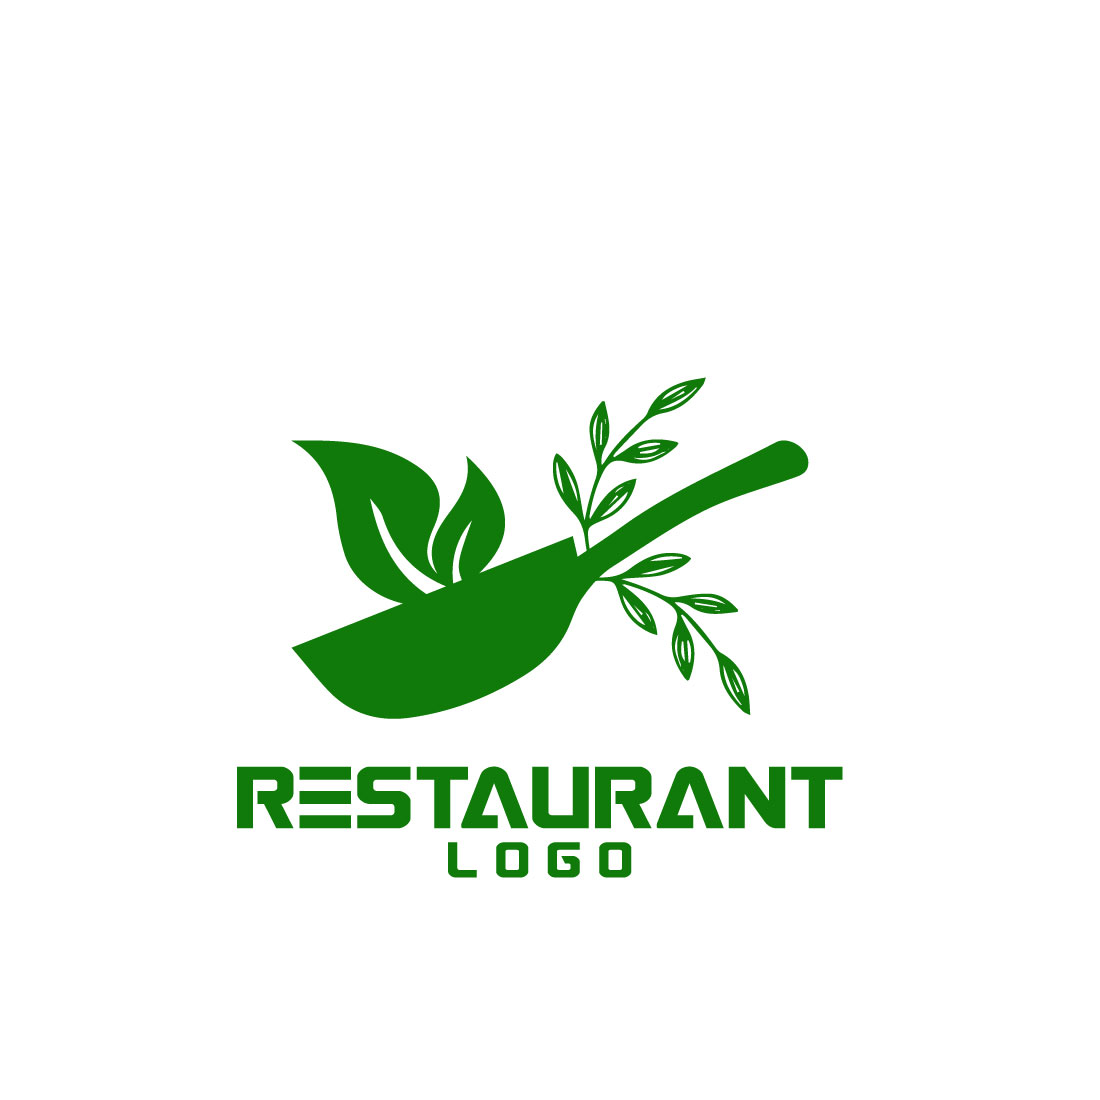 Free Cooking Restaurant Logo cover image.